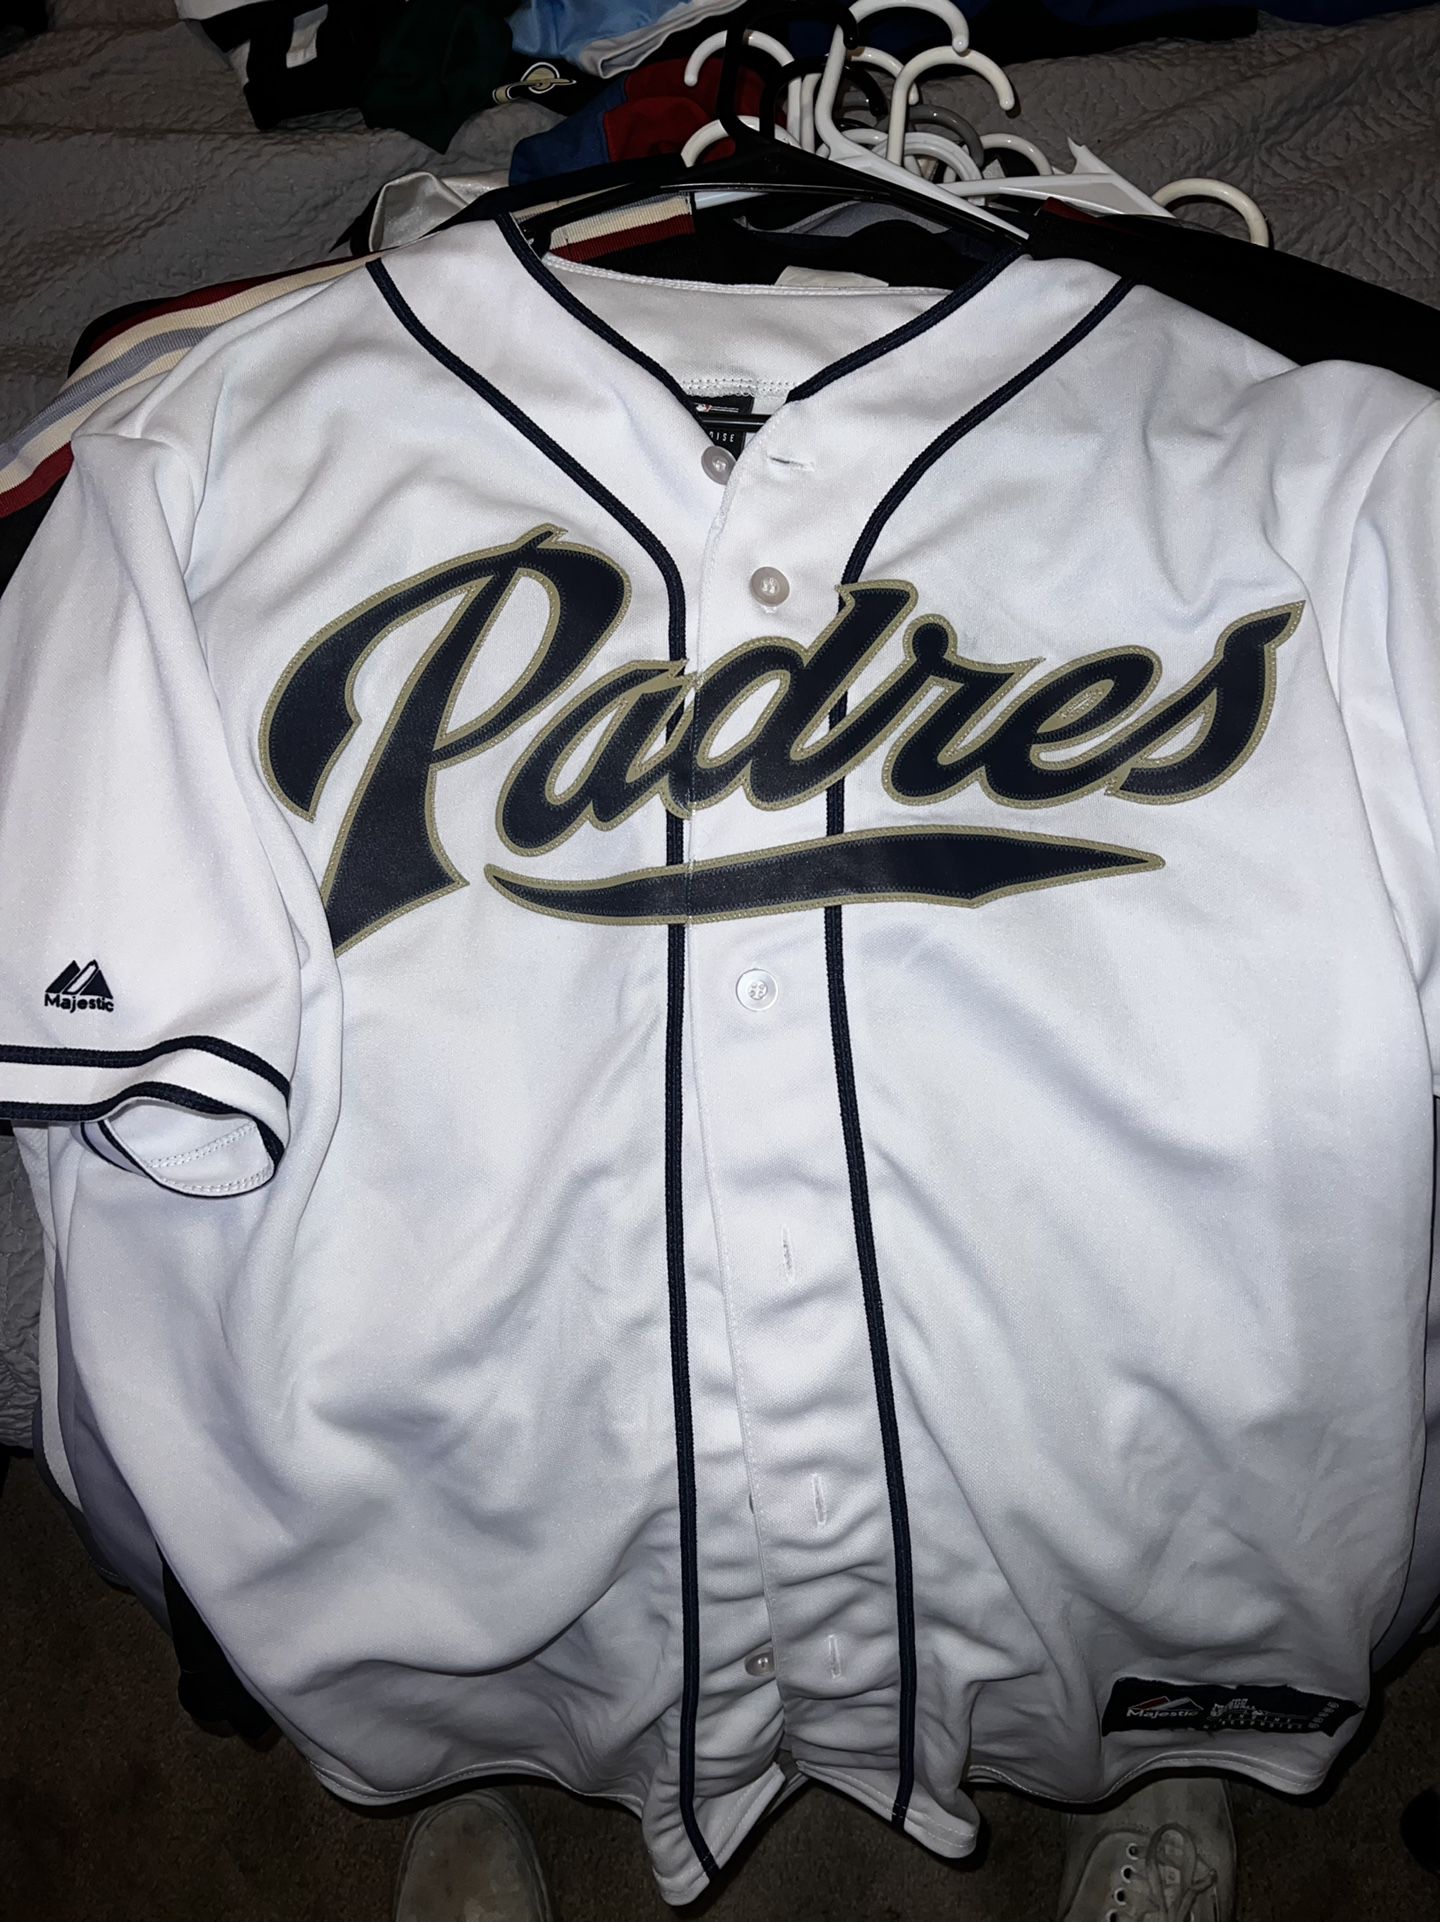 Mlb Padres Jersey #25 Venable